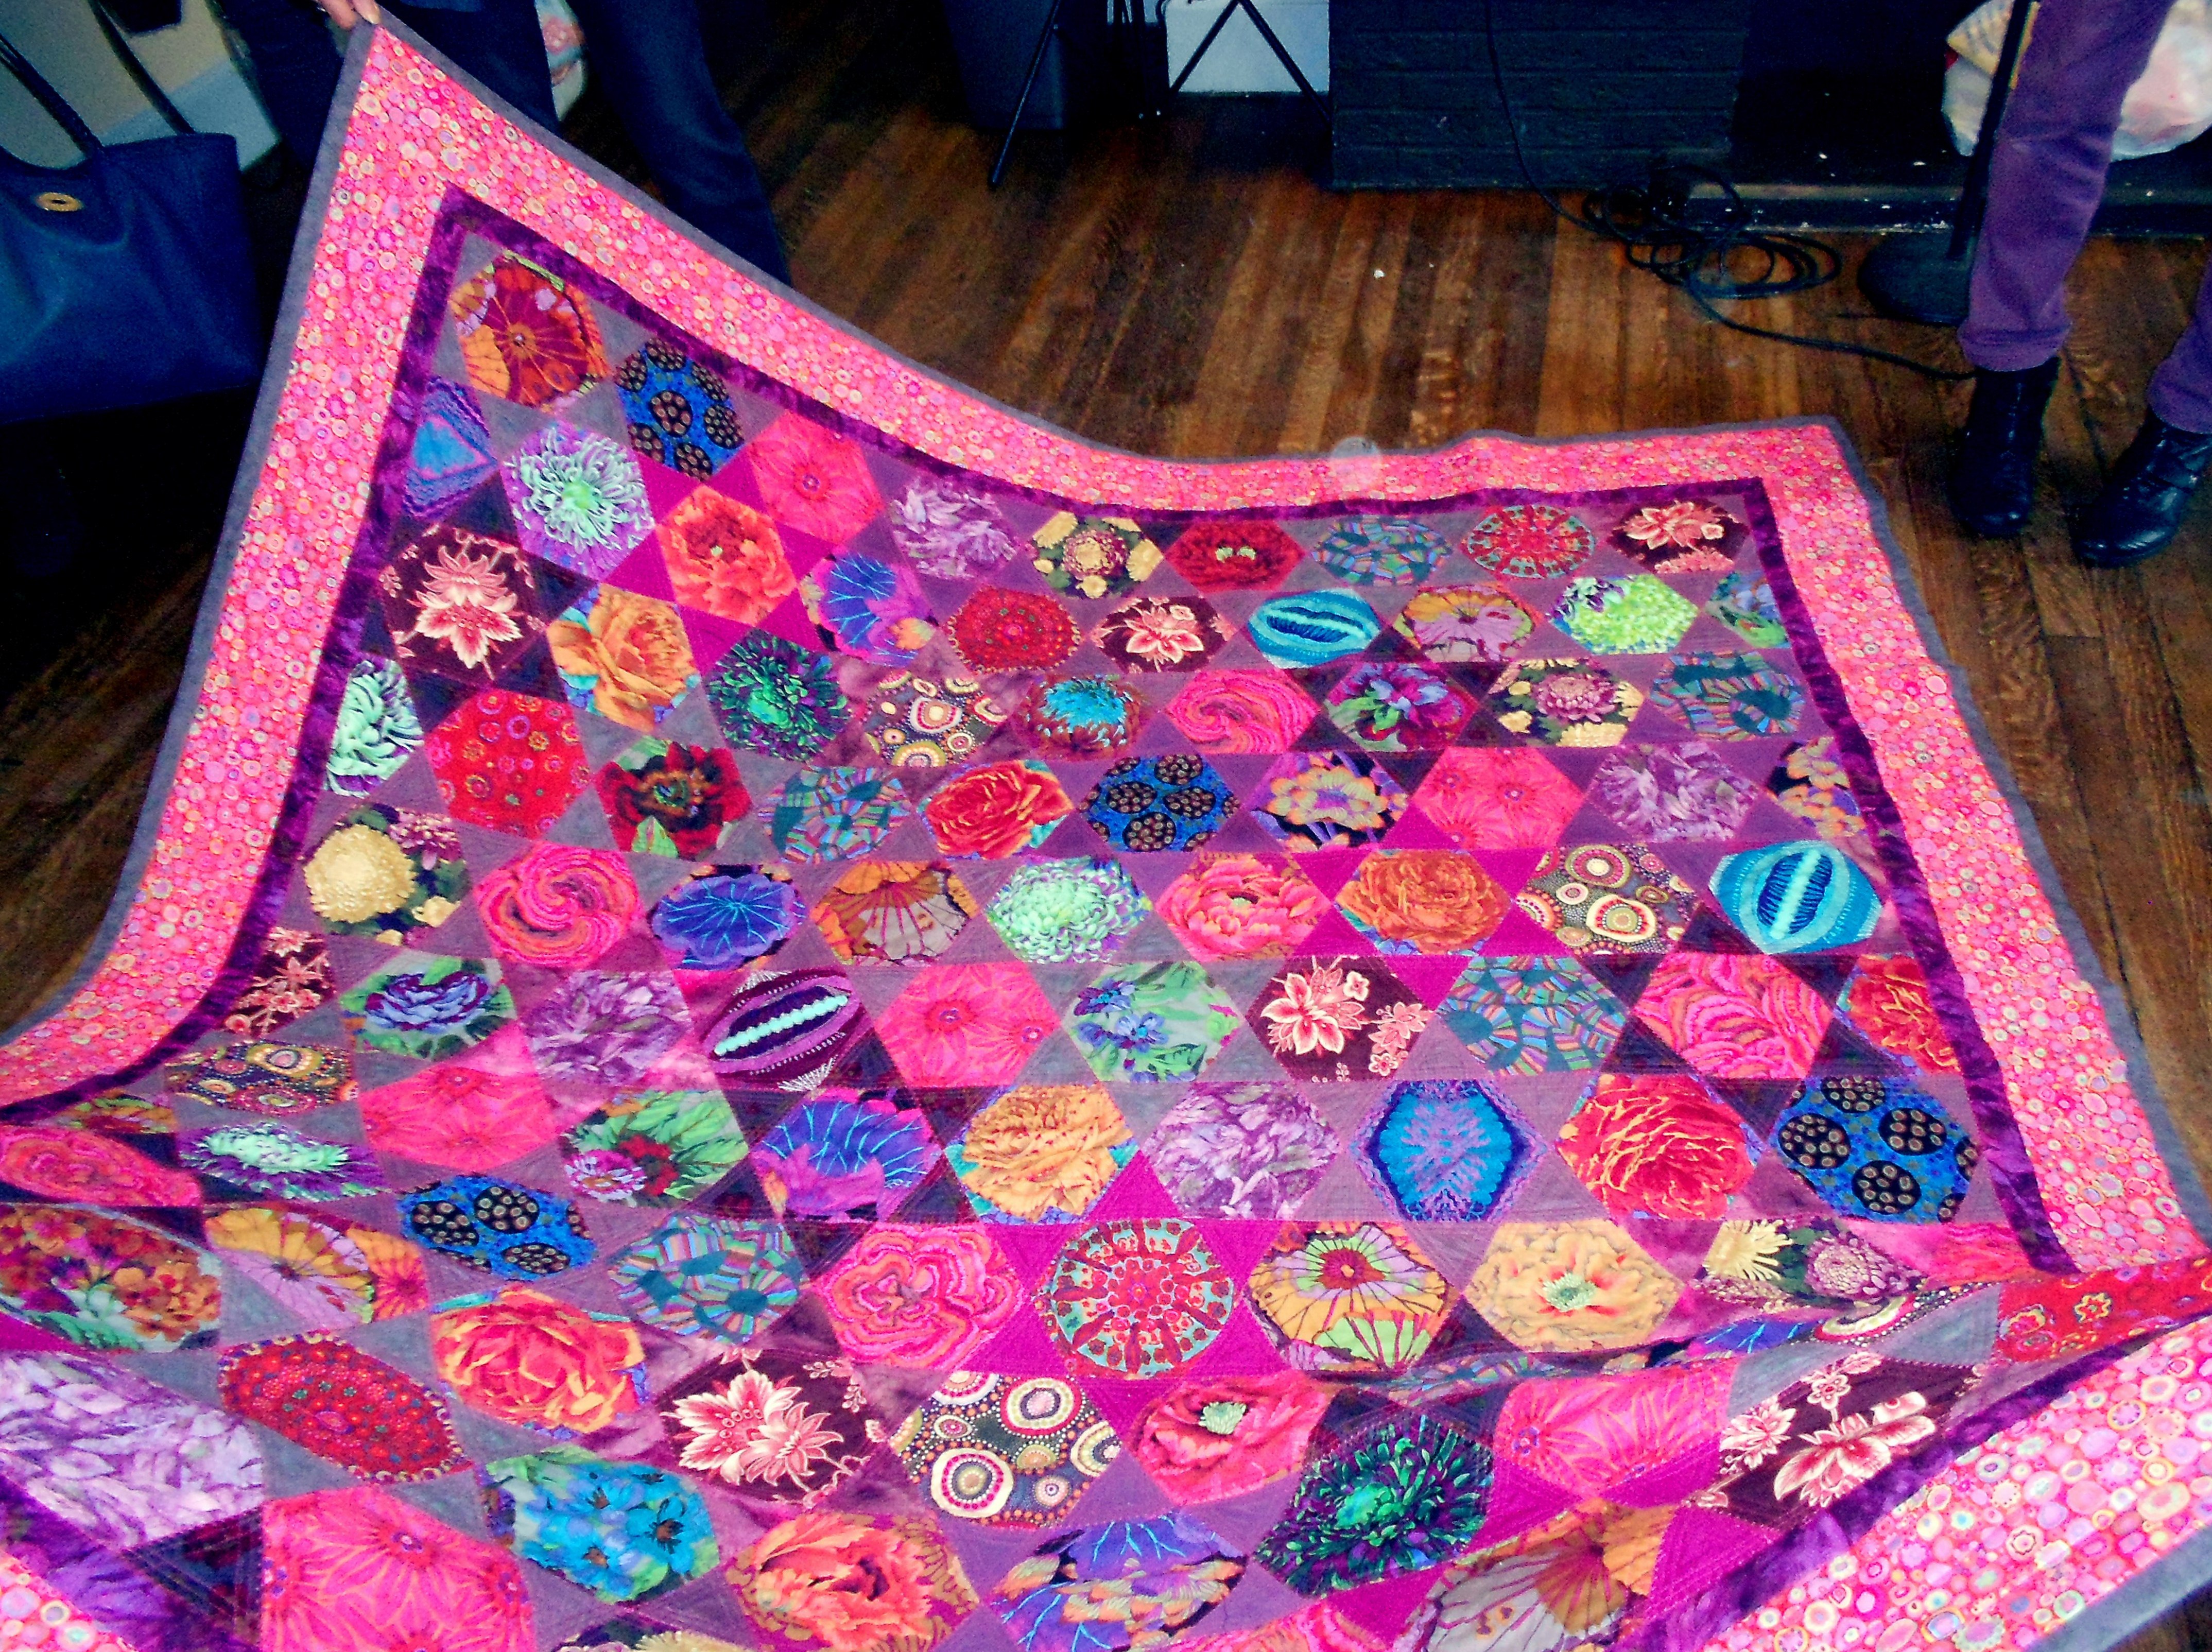 completed Kaffe Fassett quilt by Gill Roberts